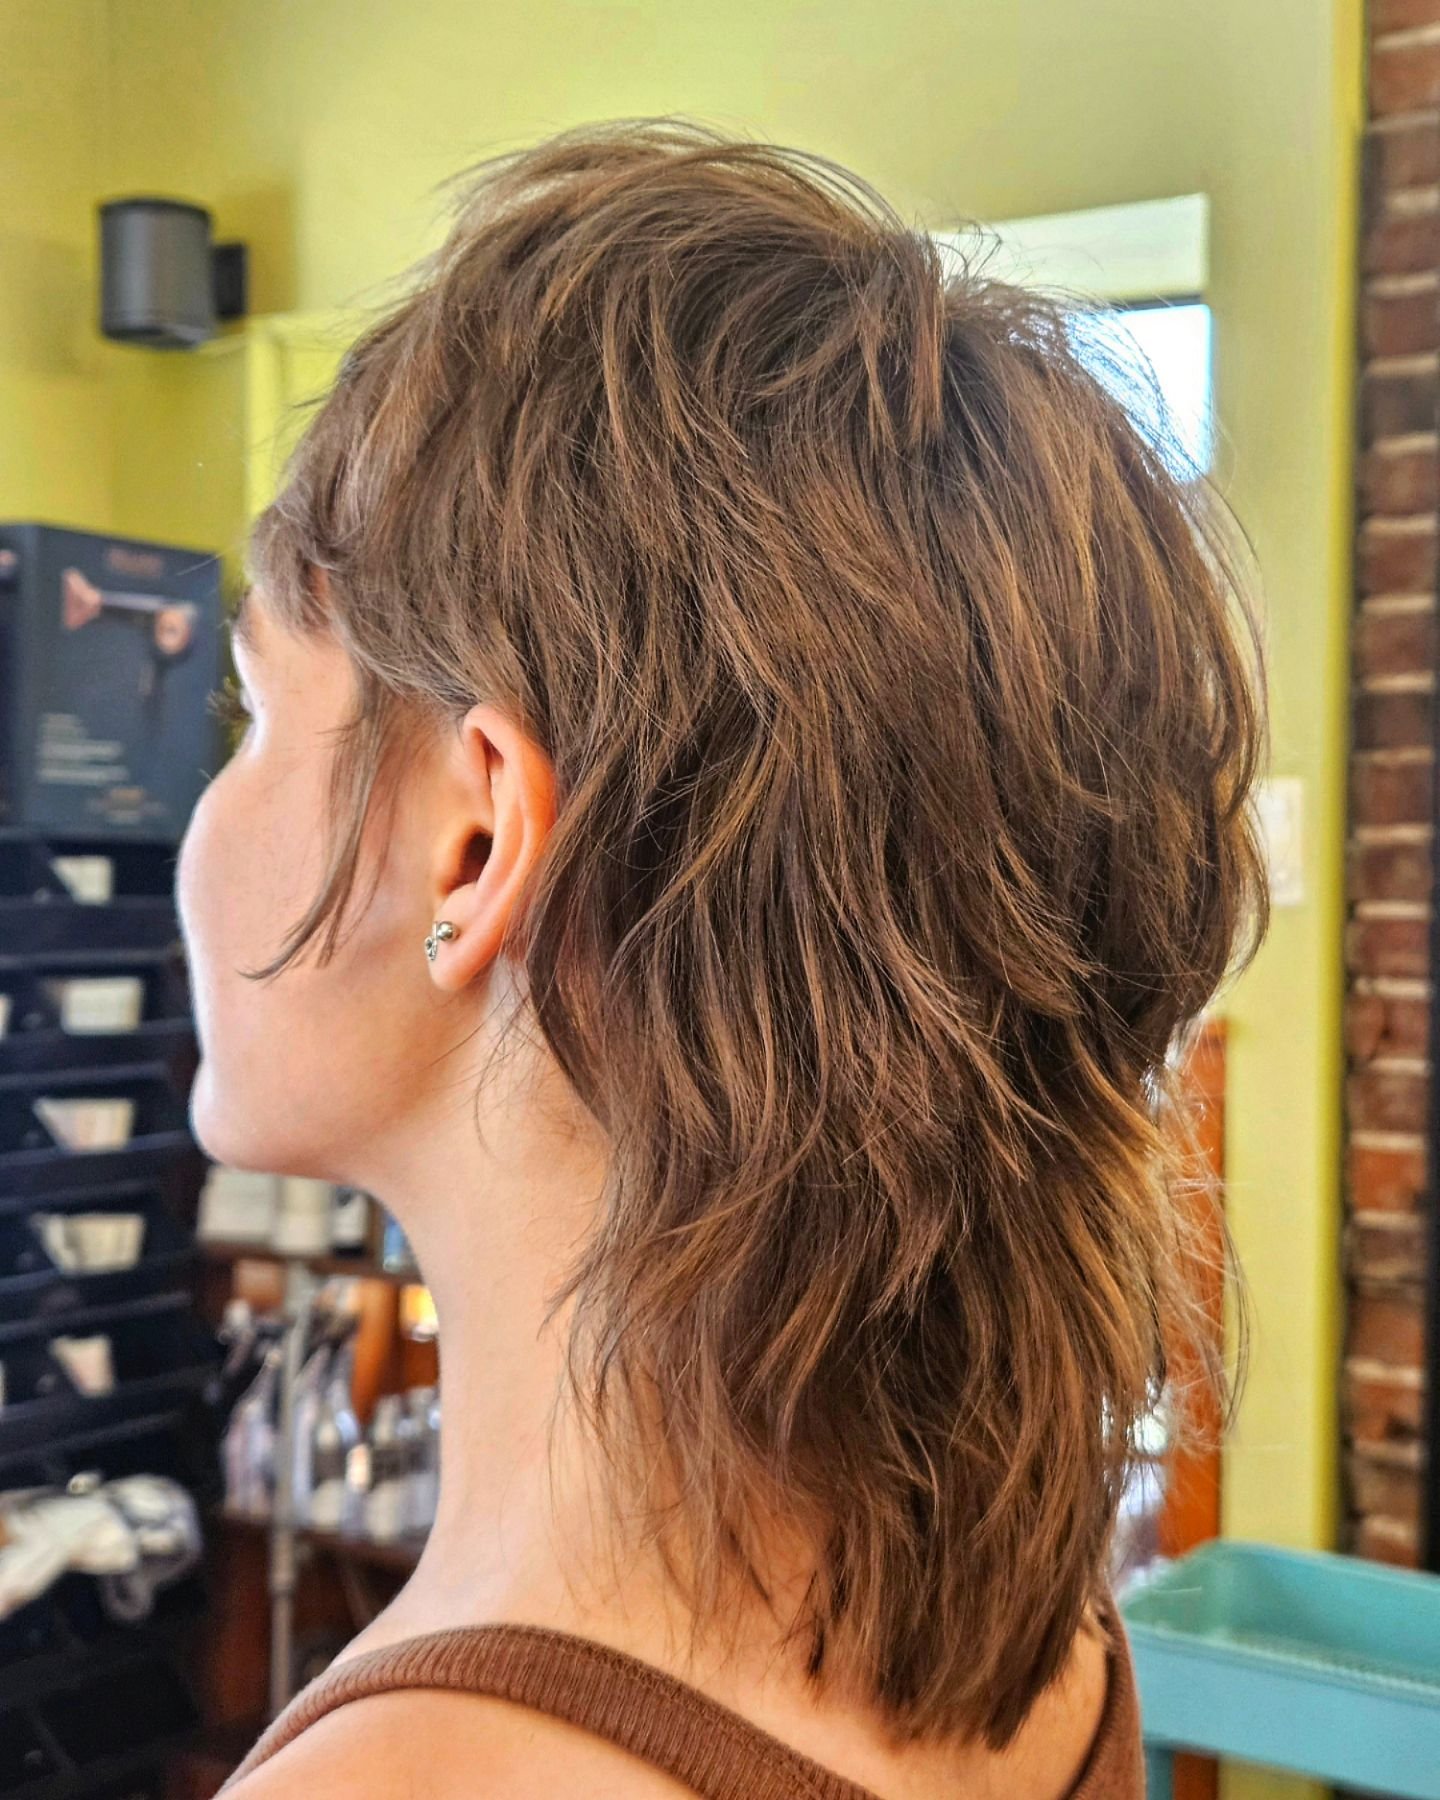 Bringing out natural texture is something that gives me a good serotonin boost! 

Cutting a baby mullet for River (they/them) and creating a look just for them during our Deluxe Haircut was a killer time ✂️ 

#lexingtonkysalon #lgbtqhairstylist #lexi